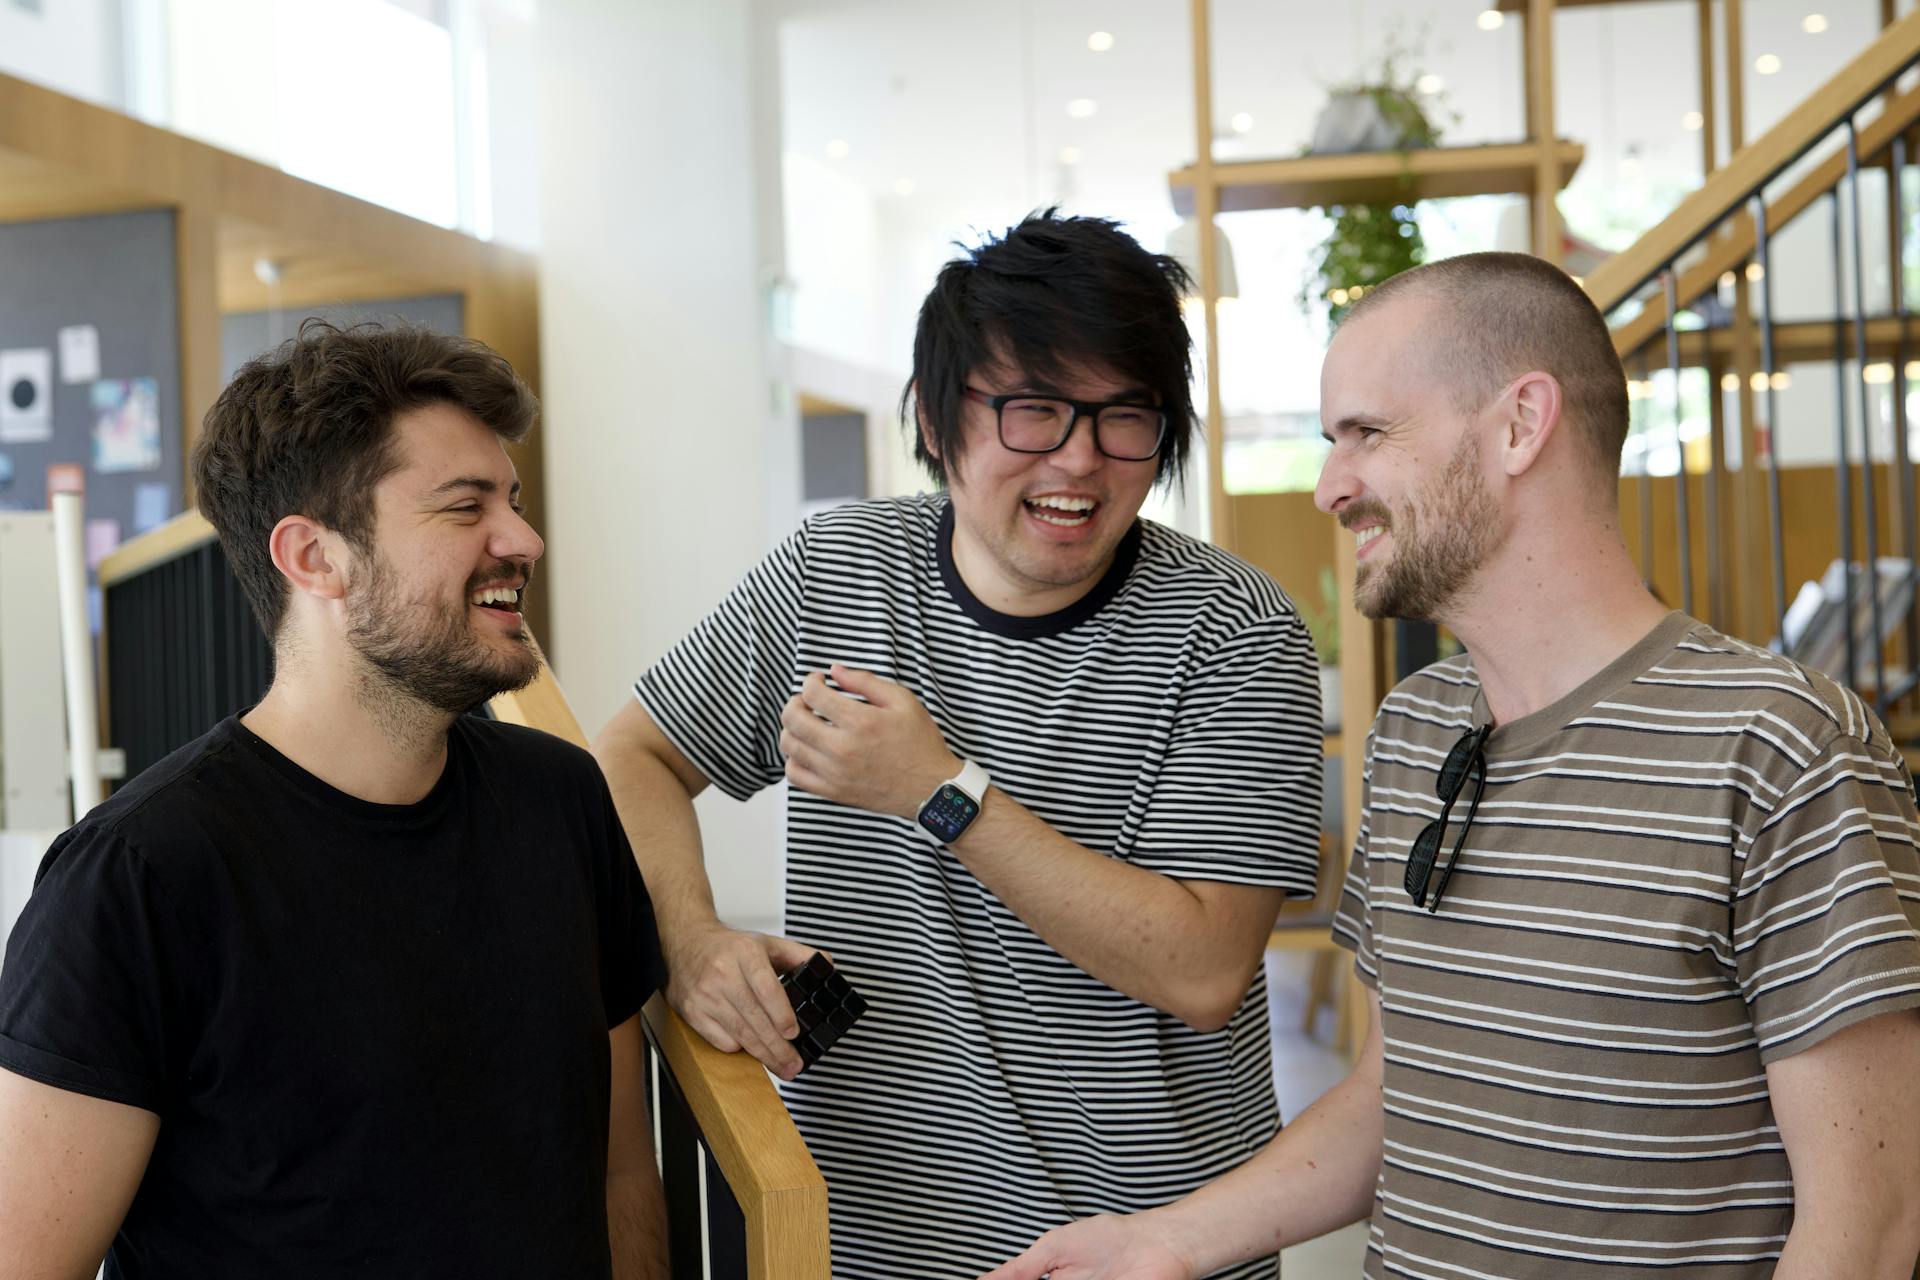 A picture of the Resend founding team, 3 people smiling in a coworking space 